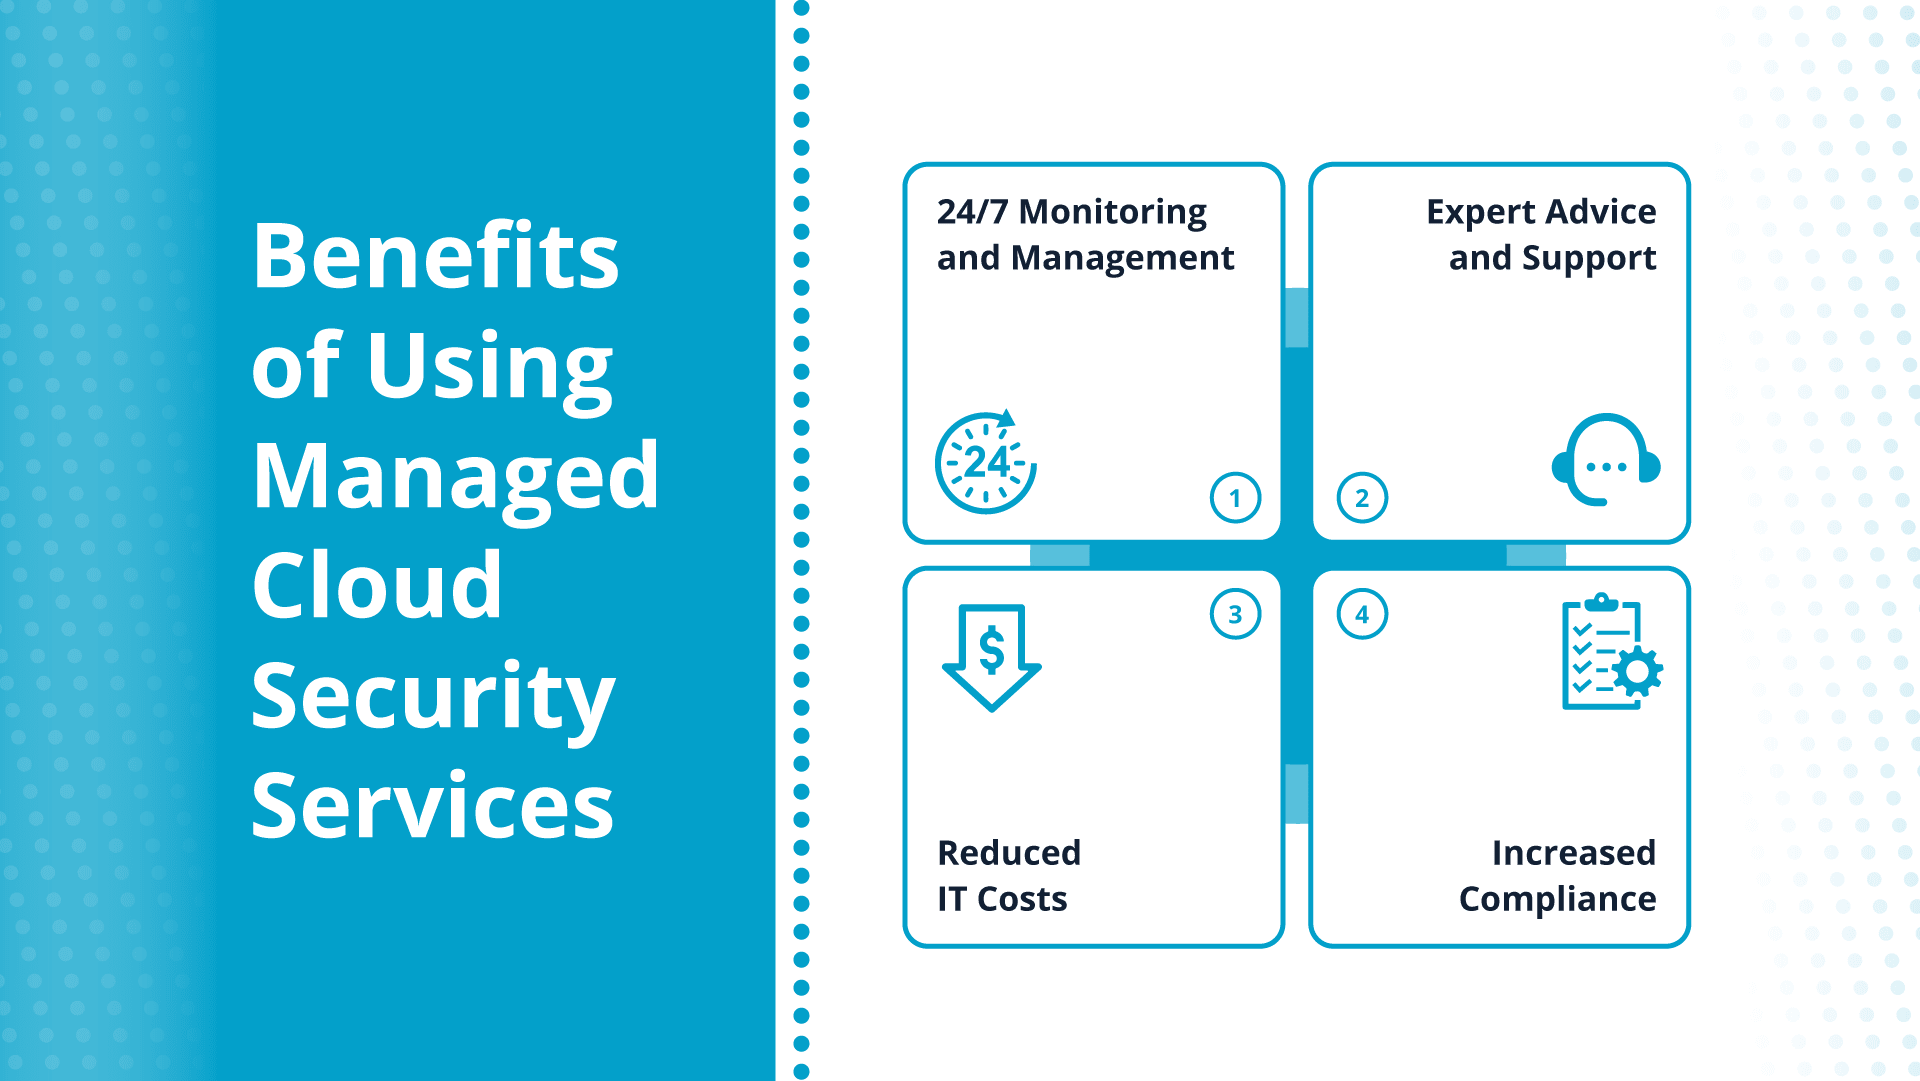 Benefits of choosing a cloud security managed service.